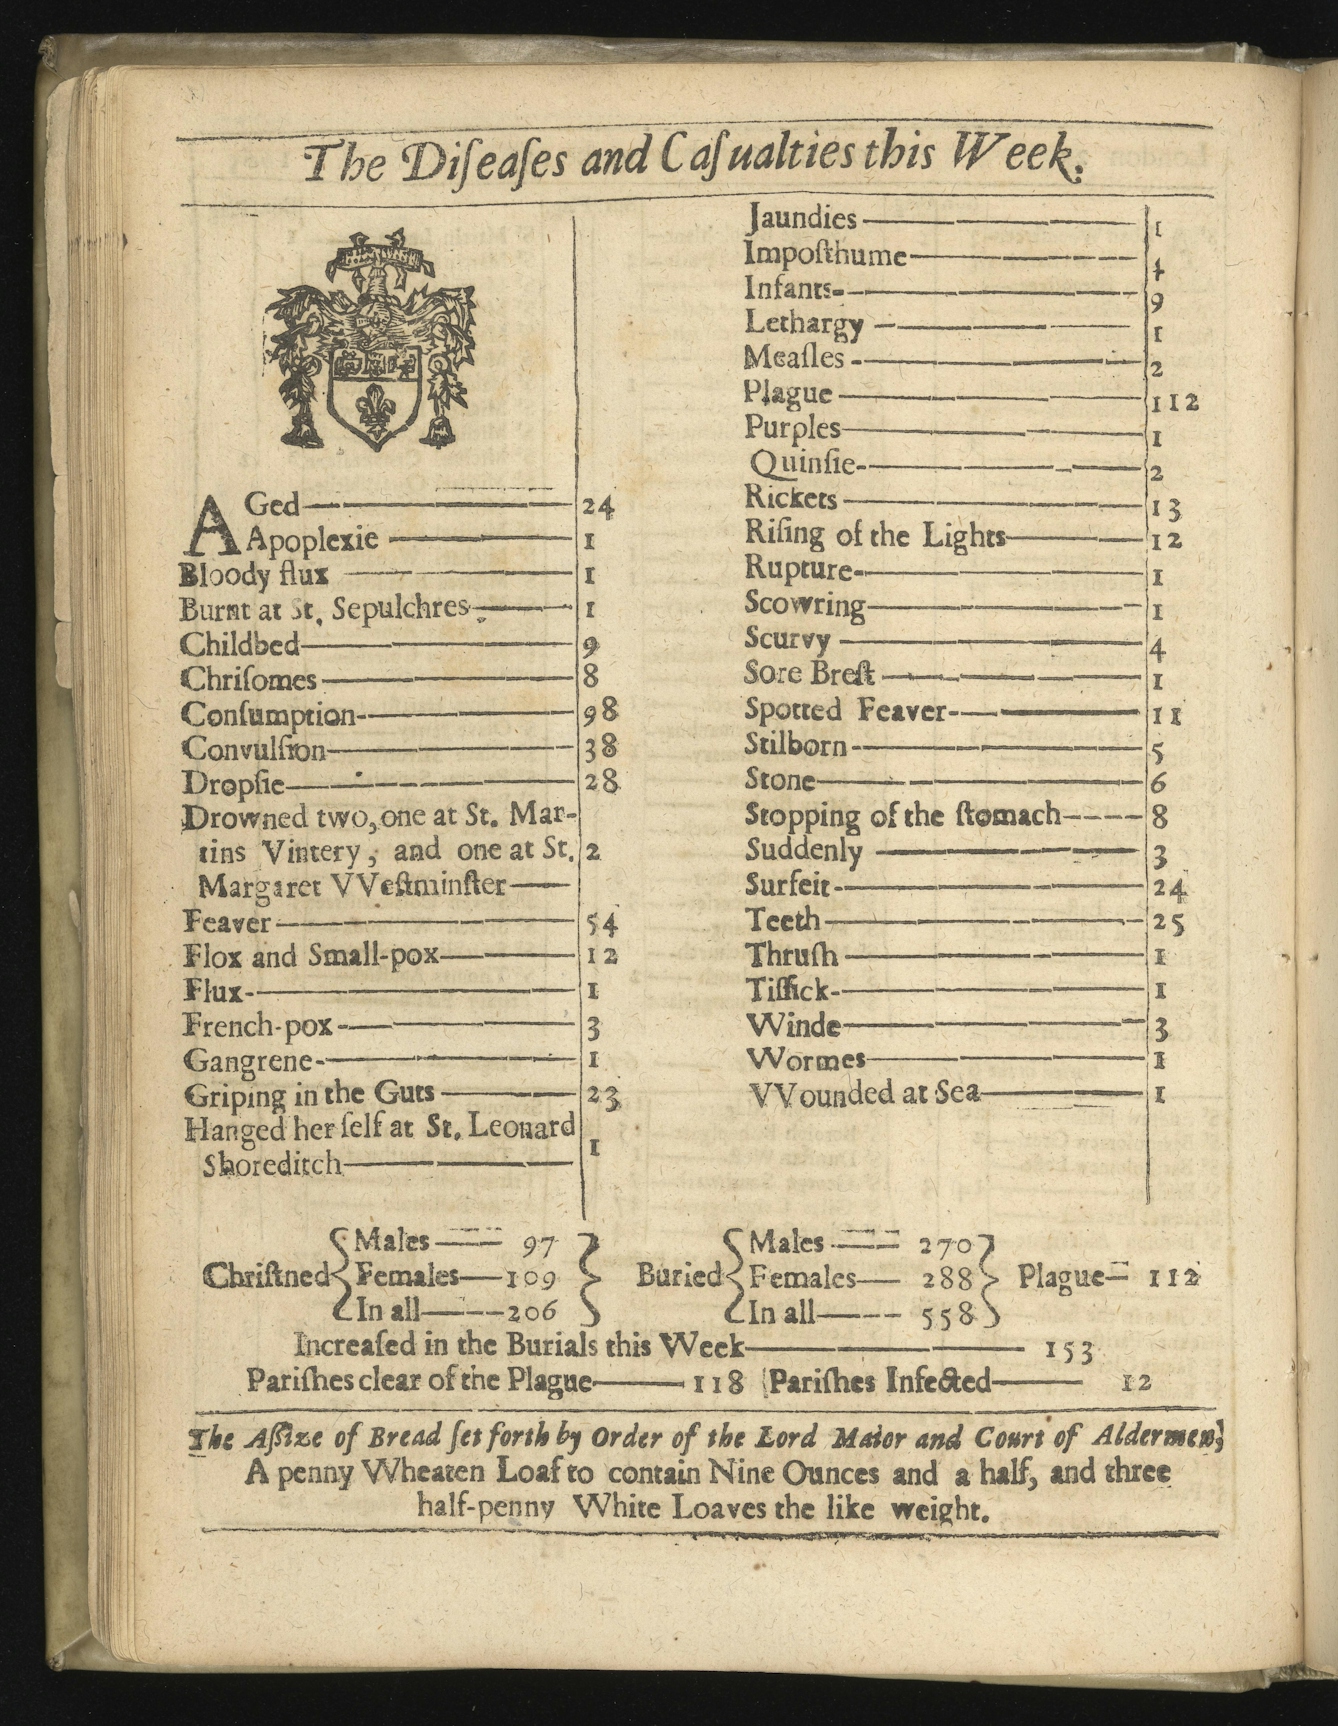 Page printed with a two-column table headed "The Diseases and Casualties this Week". 112 people are listed with Plague. the next highest is consumption, with 98 listed, and then convulsion (38). Other causes of illness or death included "burnt at St Sepulchres", "suddenly" and "teeth". 